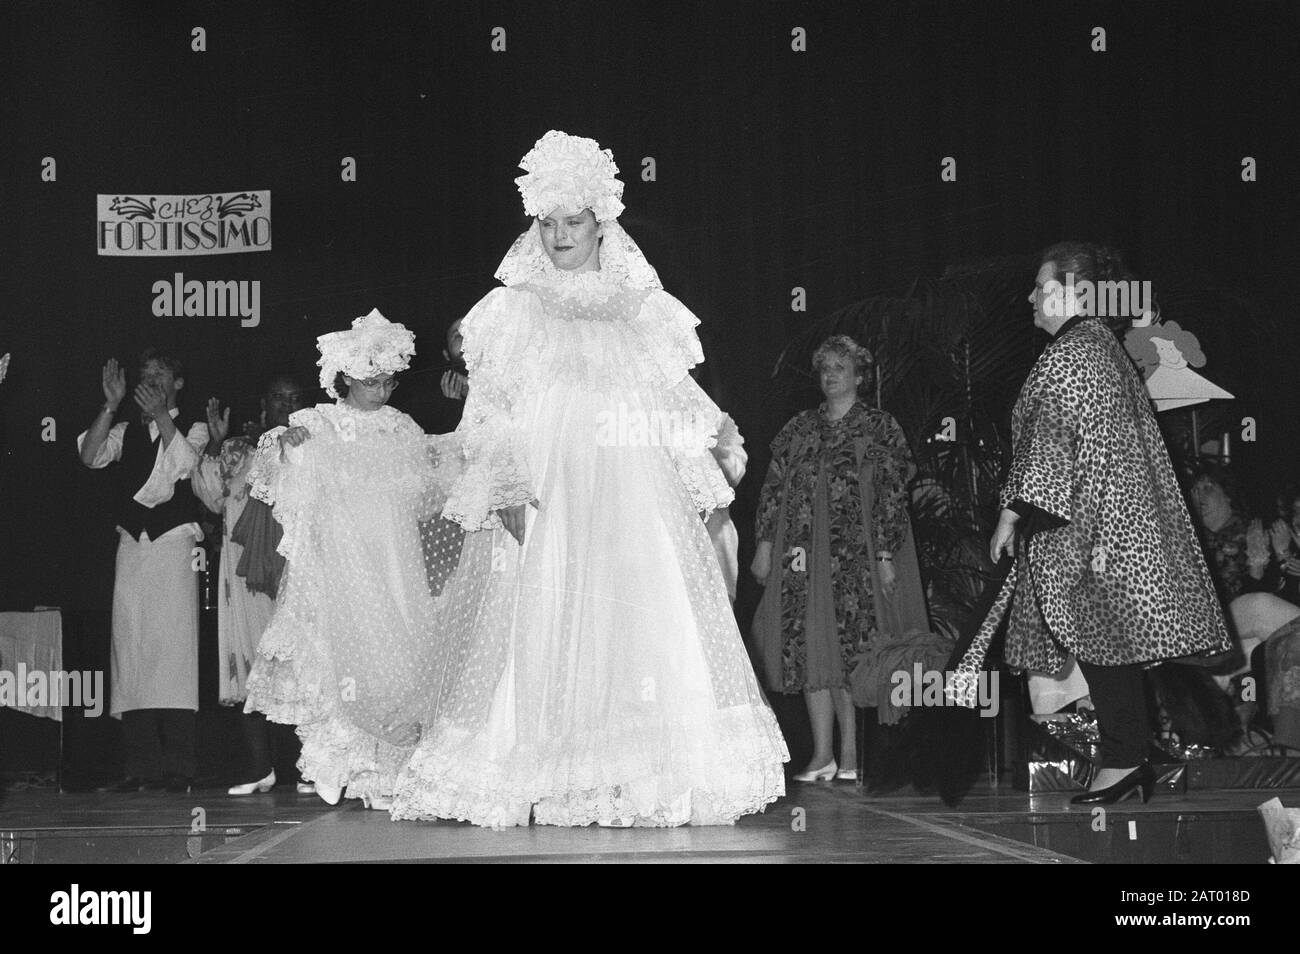 Thick Women's Day in Meervaart Amsterdam; wedding dress for Fat Women Date:  26 april 1986 Location: Amsterdam, Noord-Holland Keywords: wedding dresses,  thick, women Personname: Meervaart, De Stock Photo - Alamy